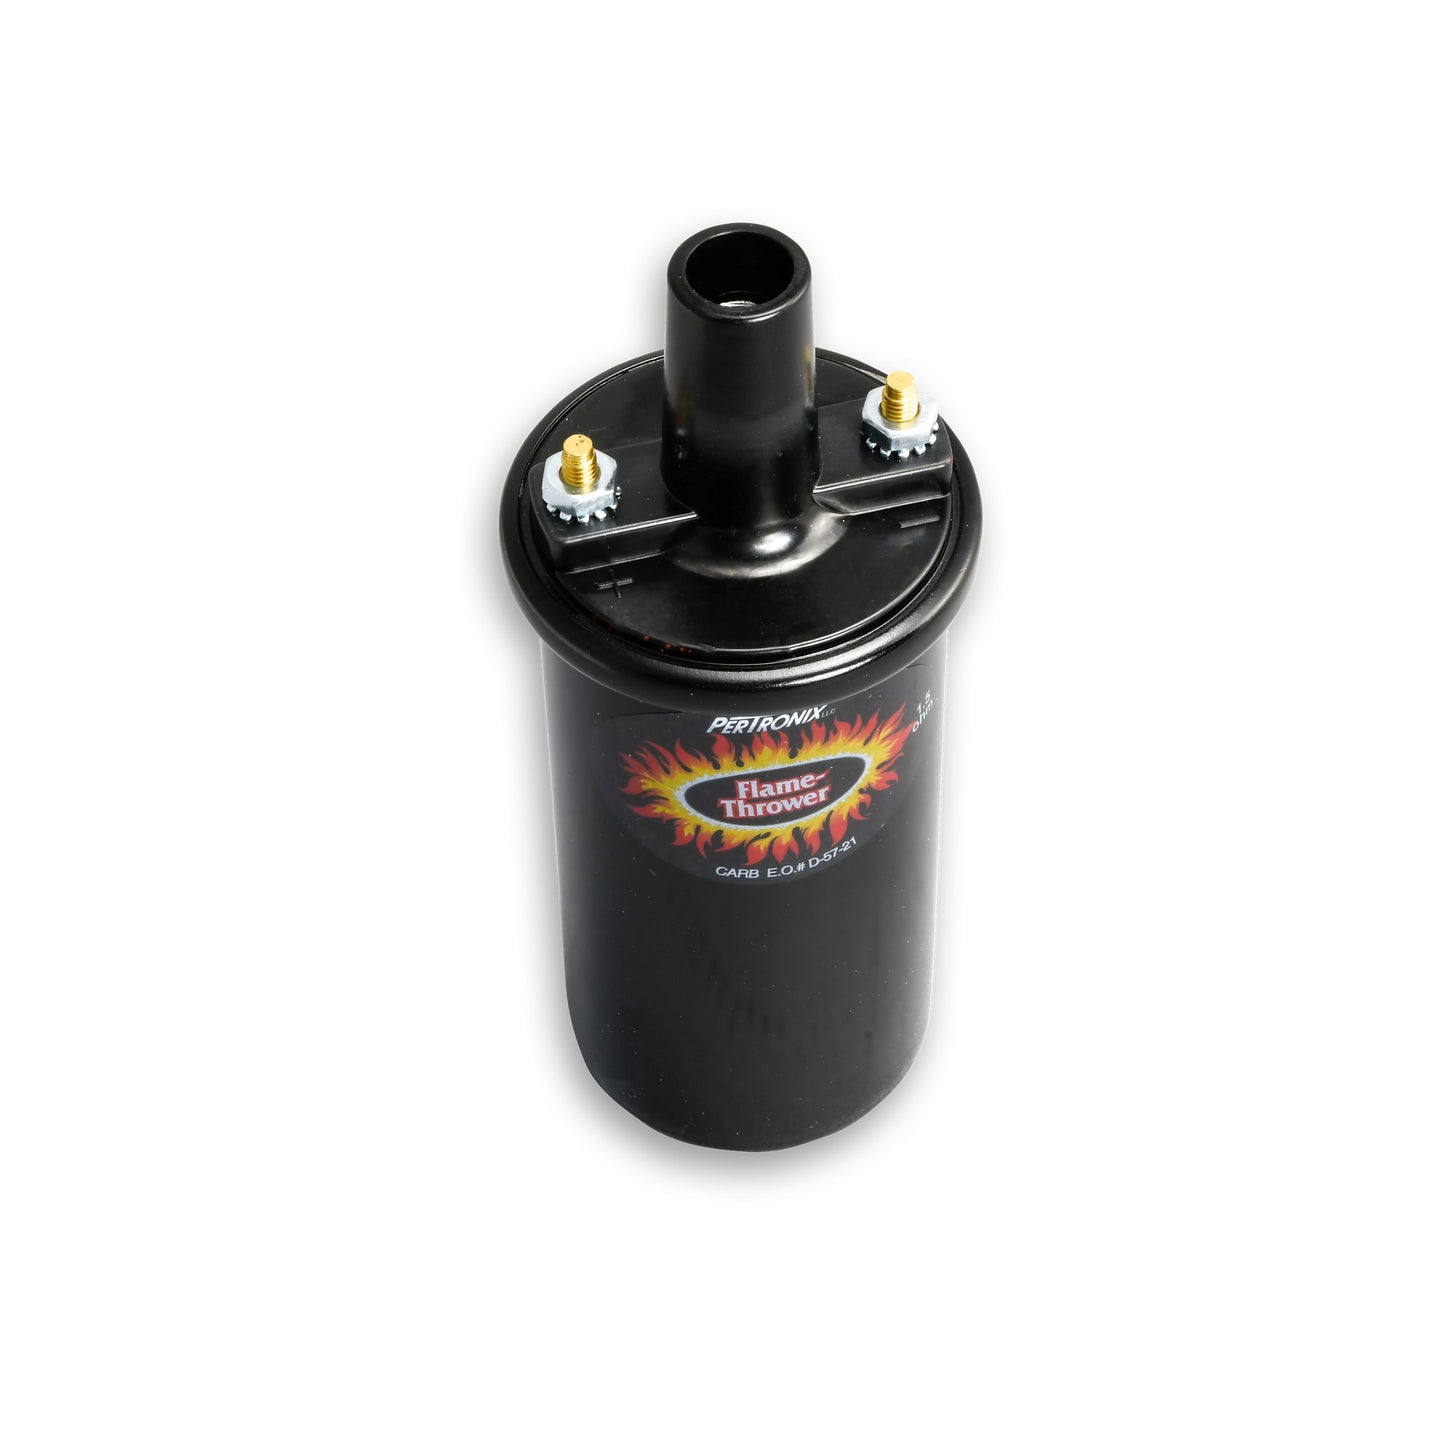 PerTronix 40011 Flame-Thrower Coil 40,000 Volt 1.5 ohm Black